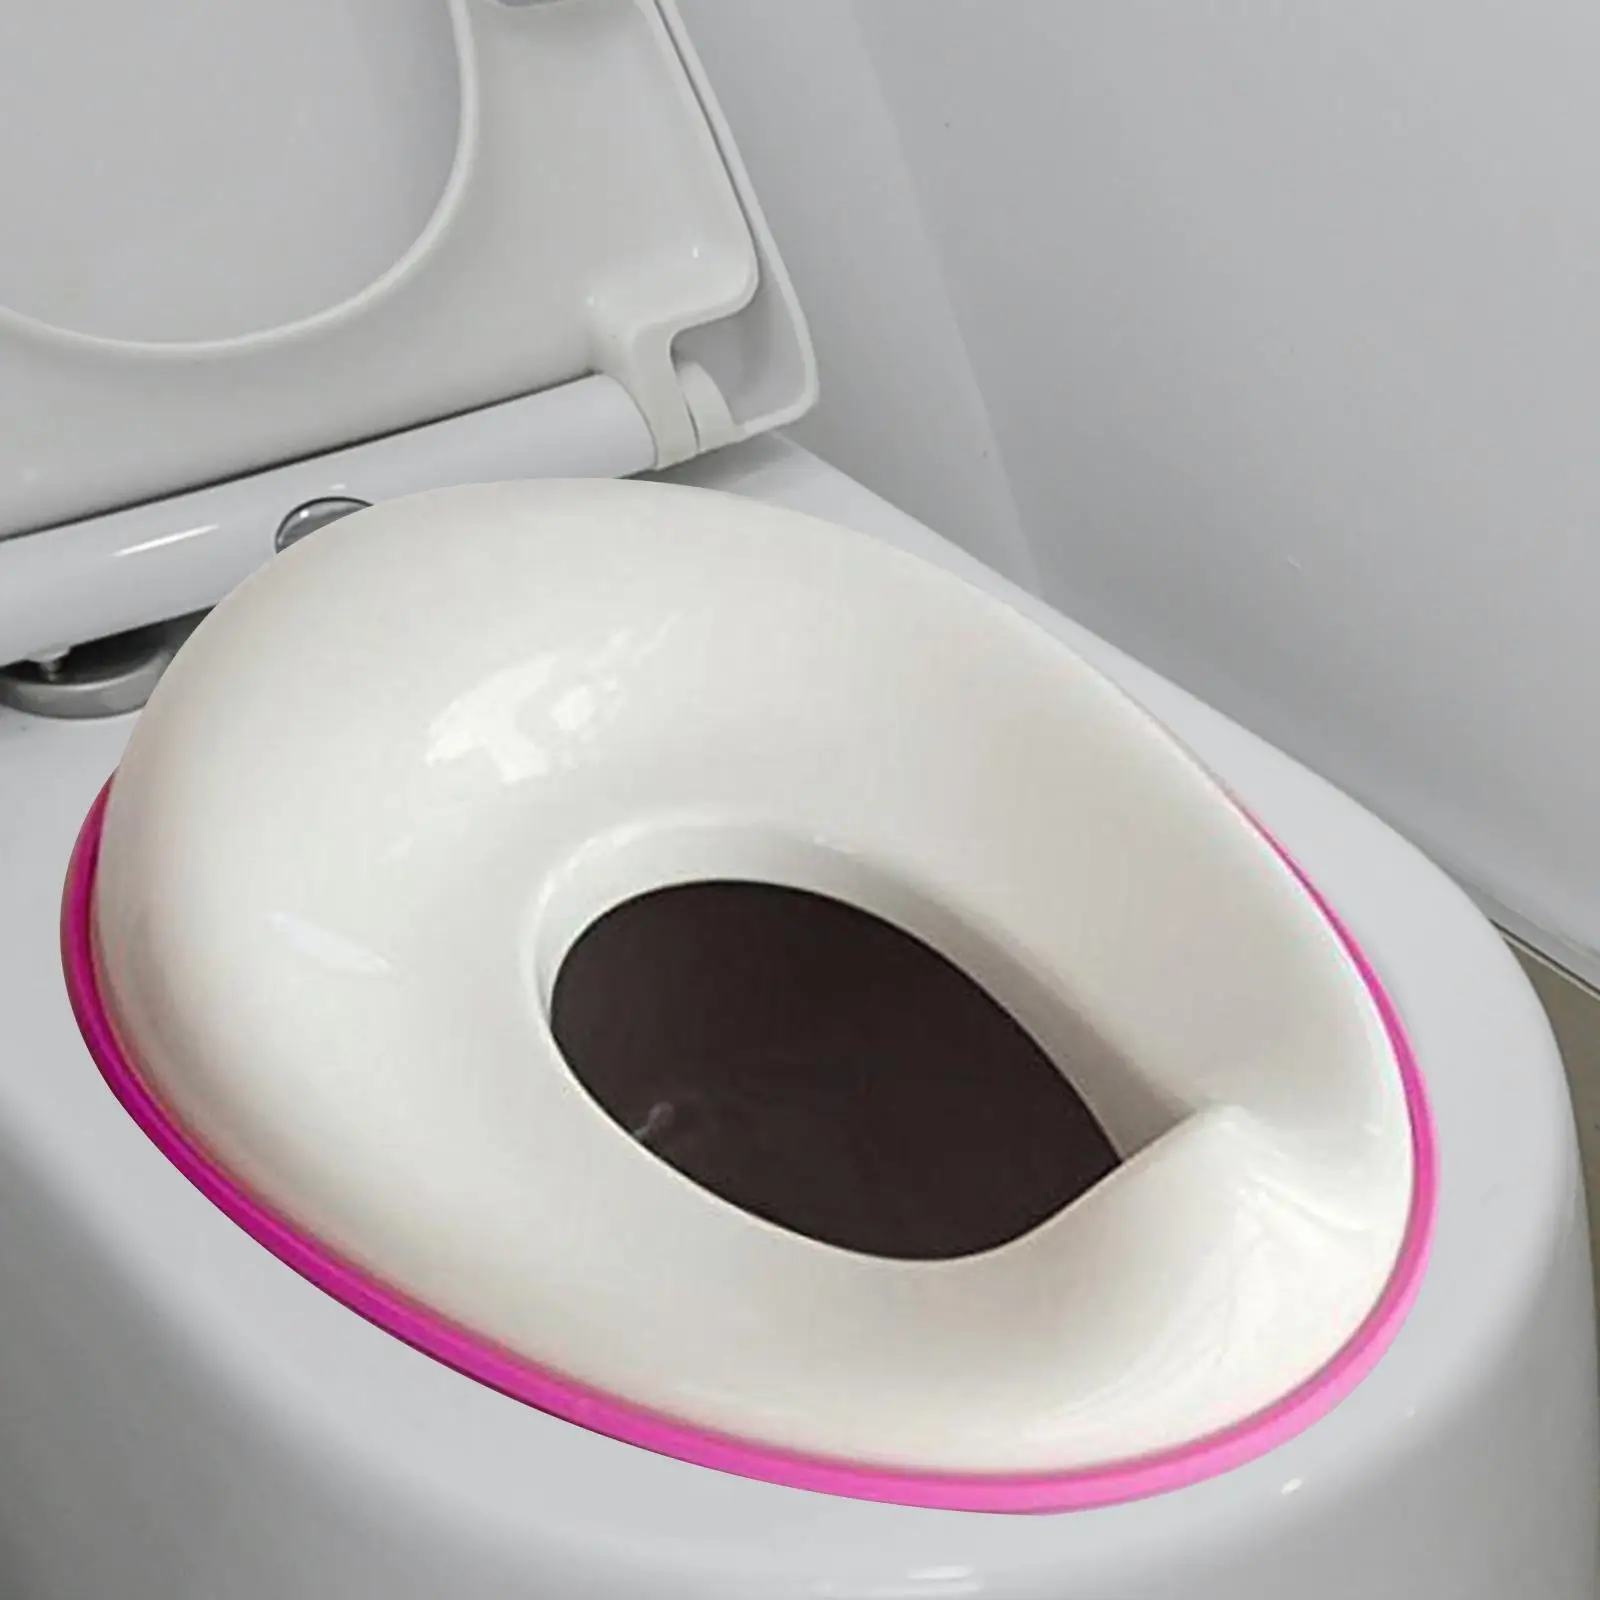 Kids Toddlers Seat for Boys and Girls Fits Round & Oval Toilets Space Saving Non Slip Toilet Trainer